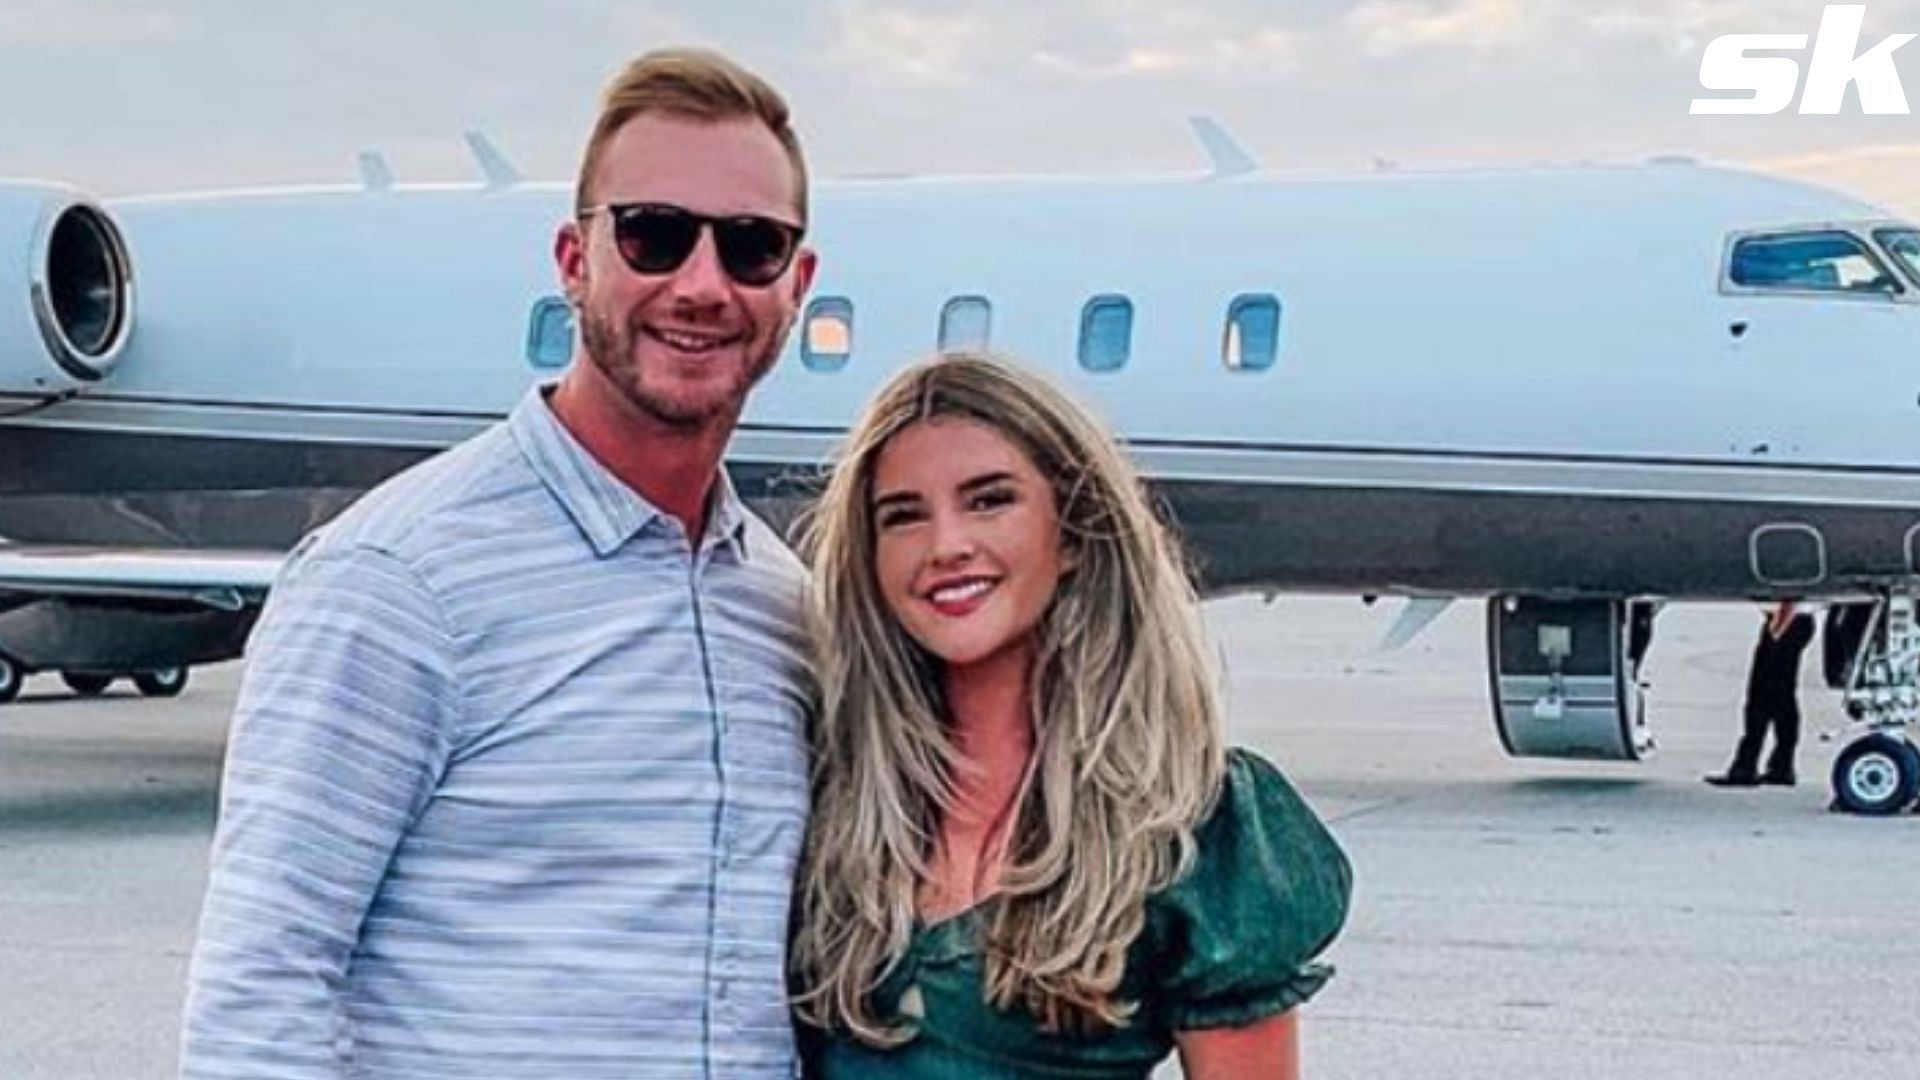 MLB player Pete Alonso with wife Haley.